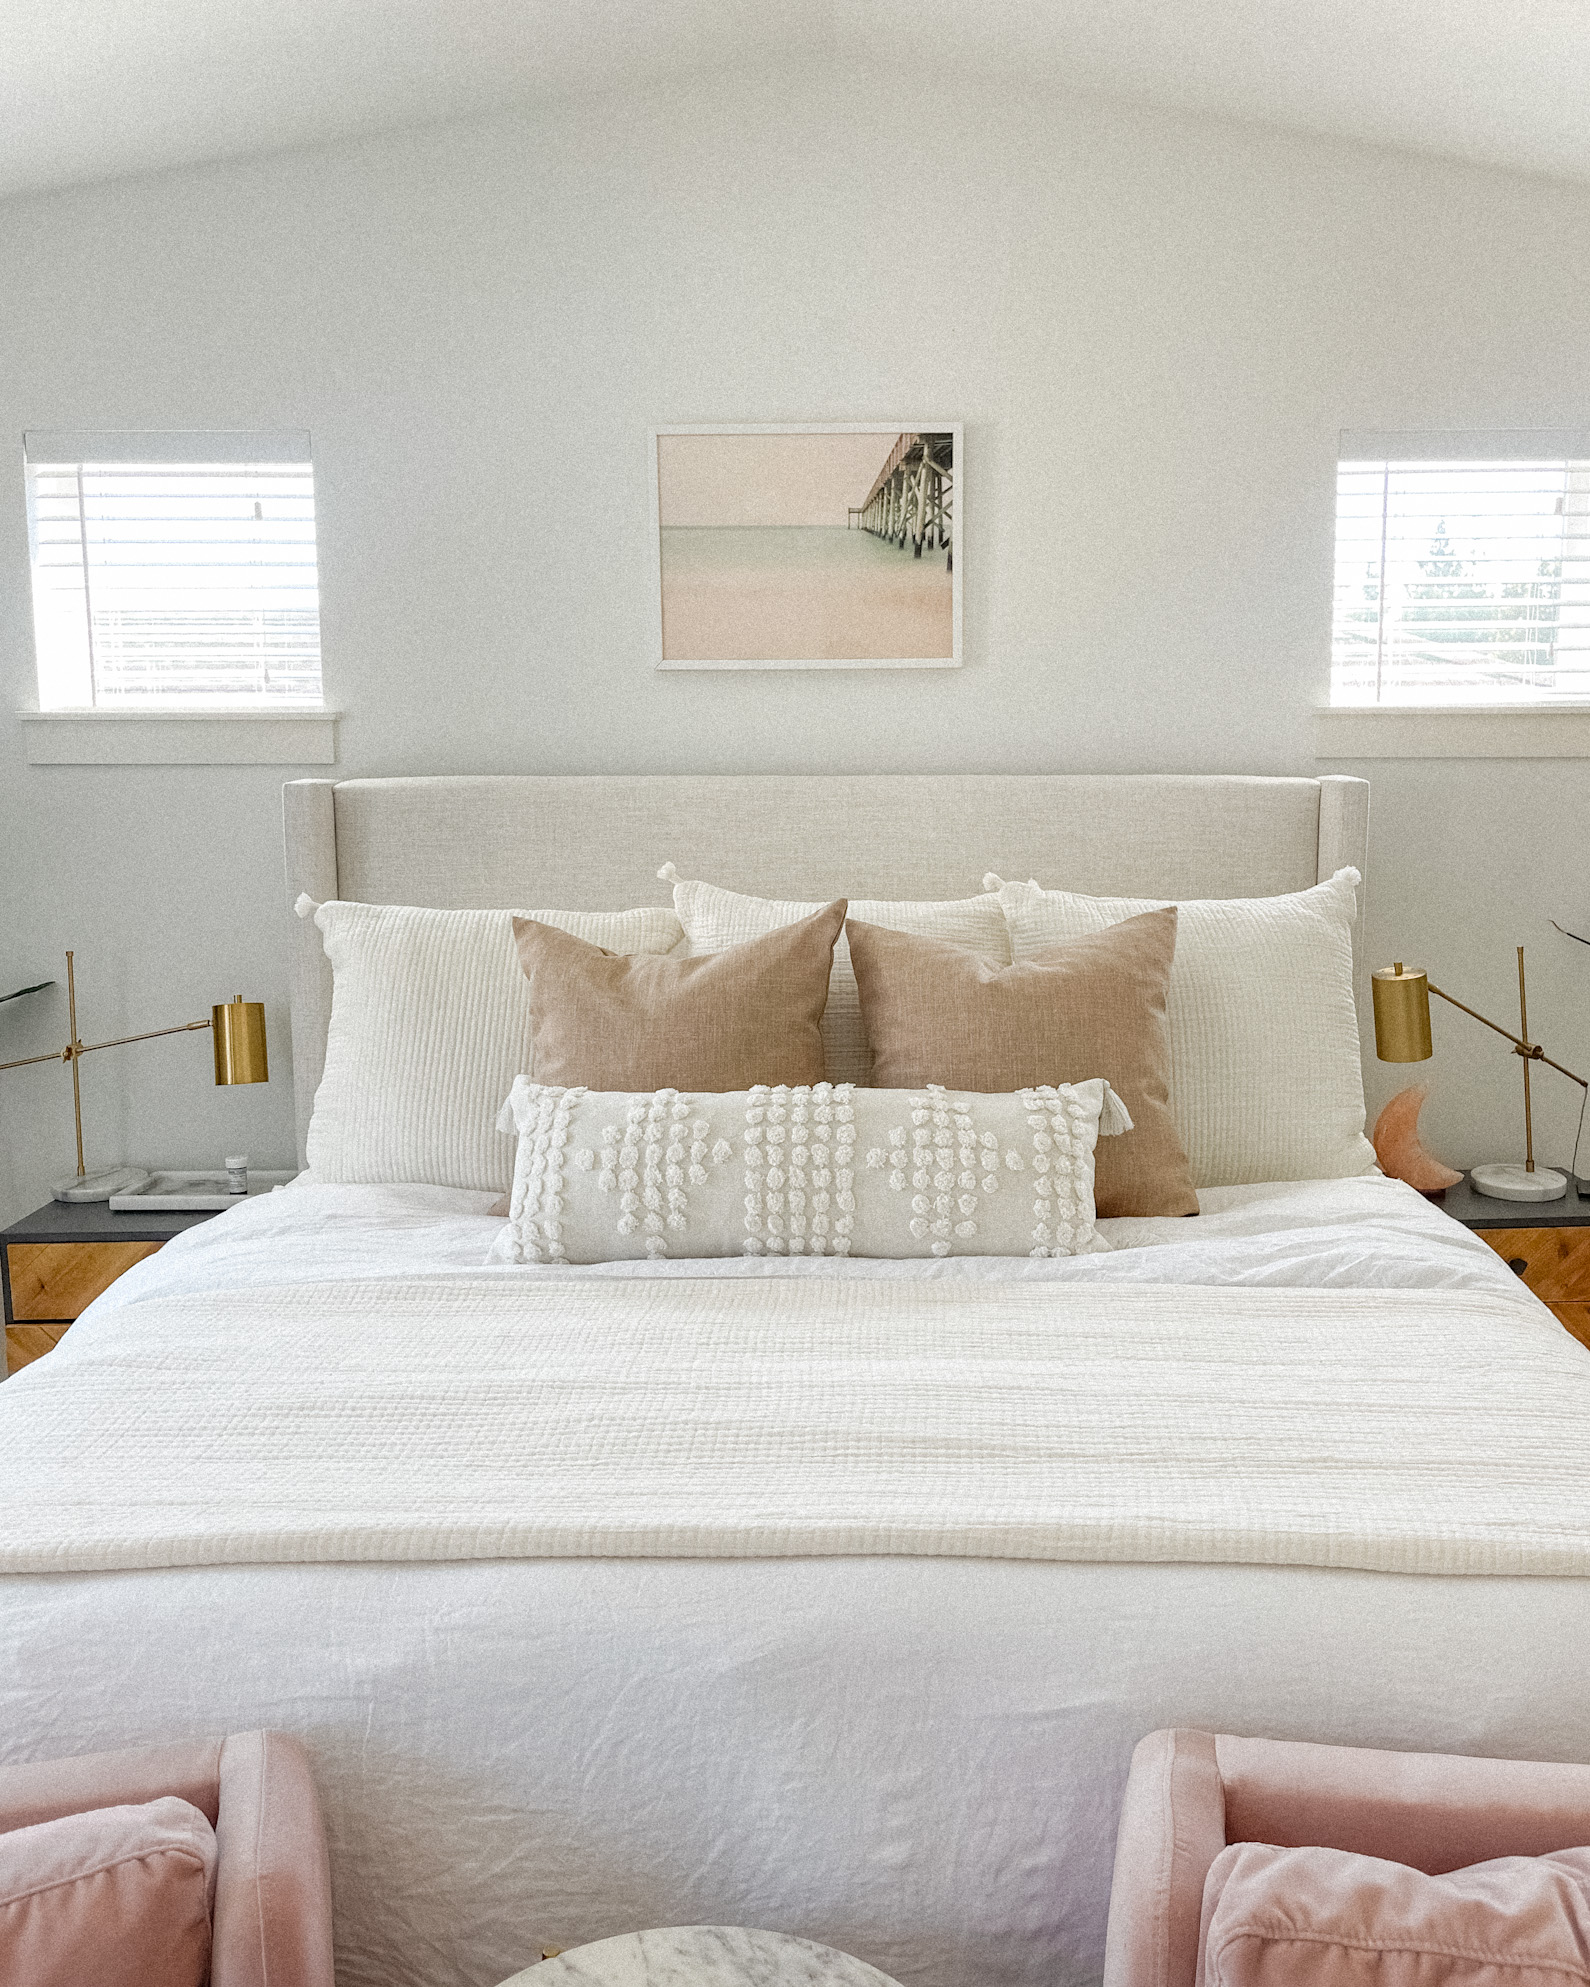 How To Arrange Pillows On A King Bed, King Bed Pillows